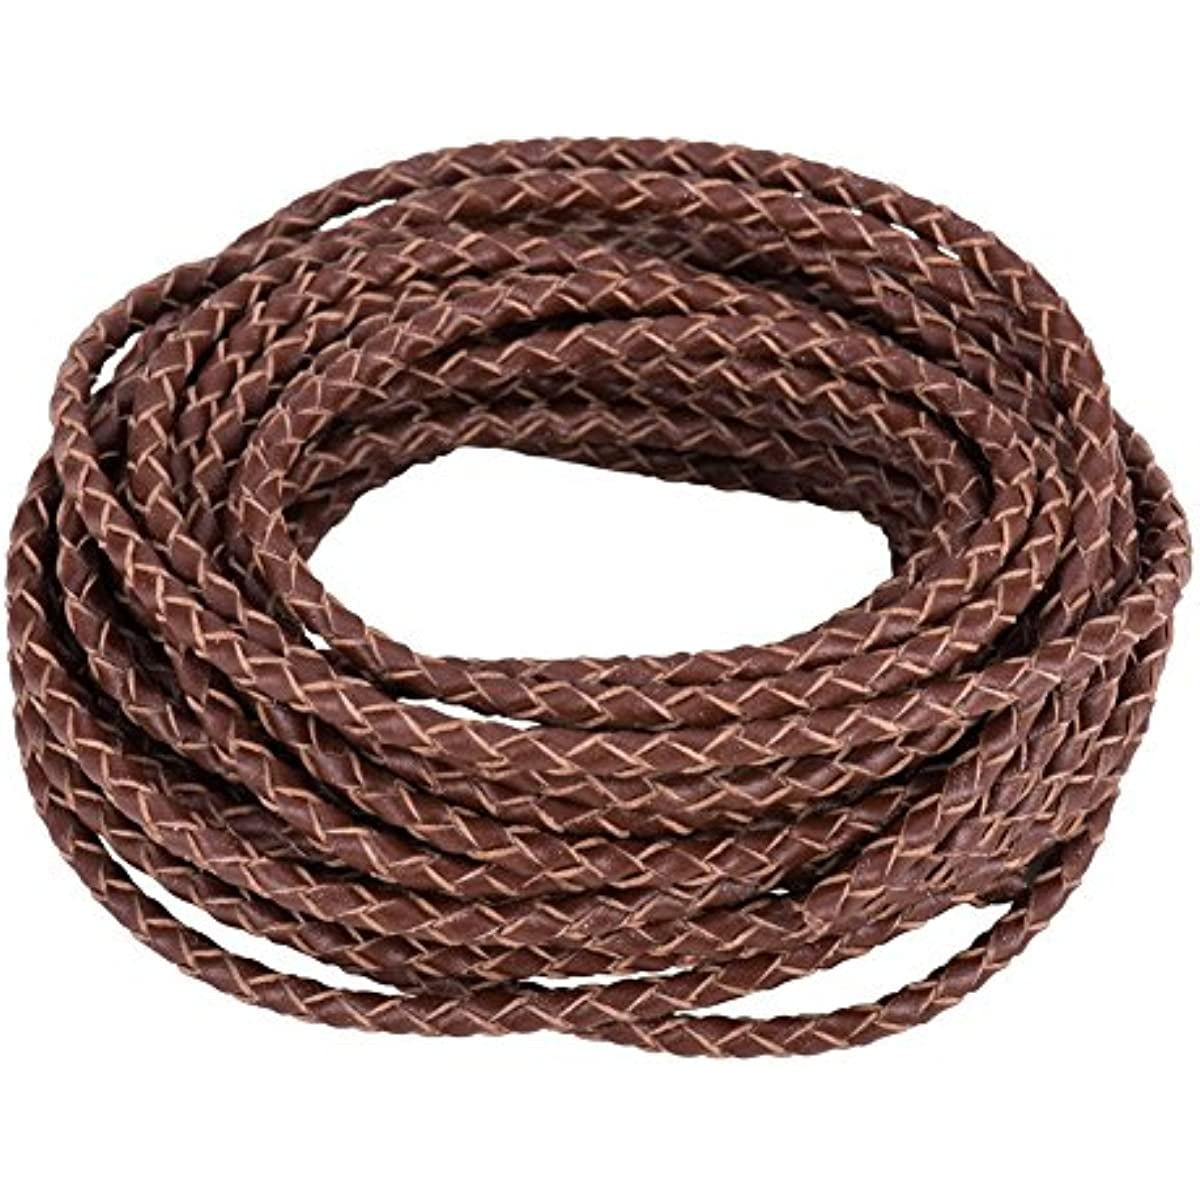  5 Mets Dia 6mm Round Braided Leather Cord-Braided Leather Cord  for Bracelet Making-Braided PU Leather Necklace Lanyard-Faux Leather Cord  for Crafts-Cord Rope Necklace Leather for Jewelry Making DIY